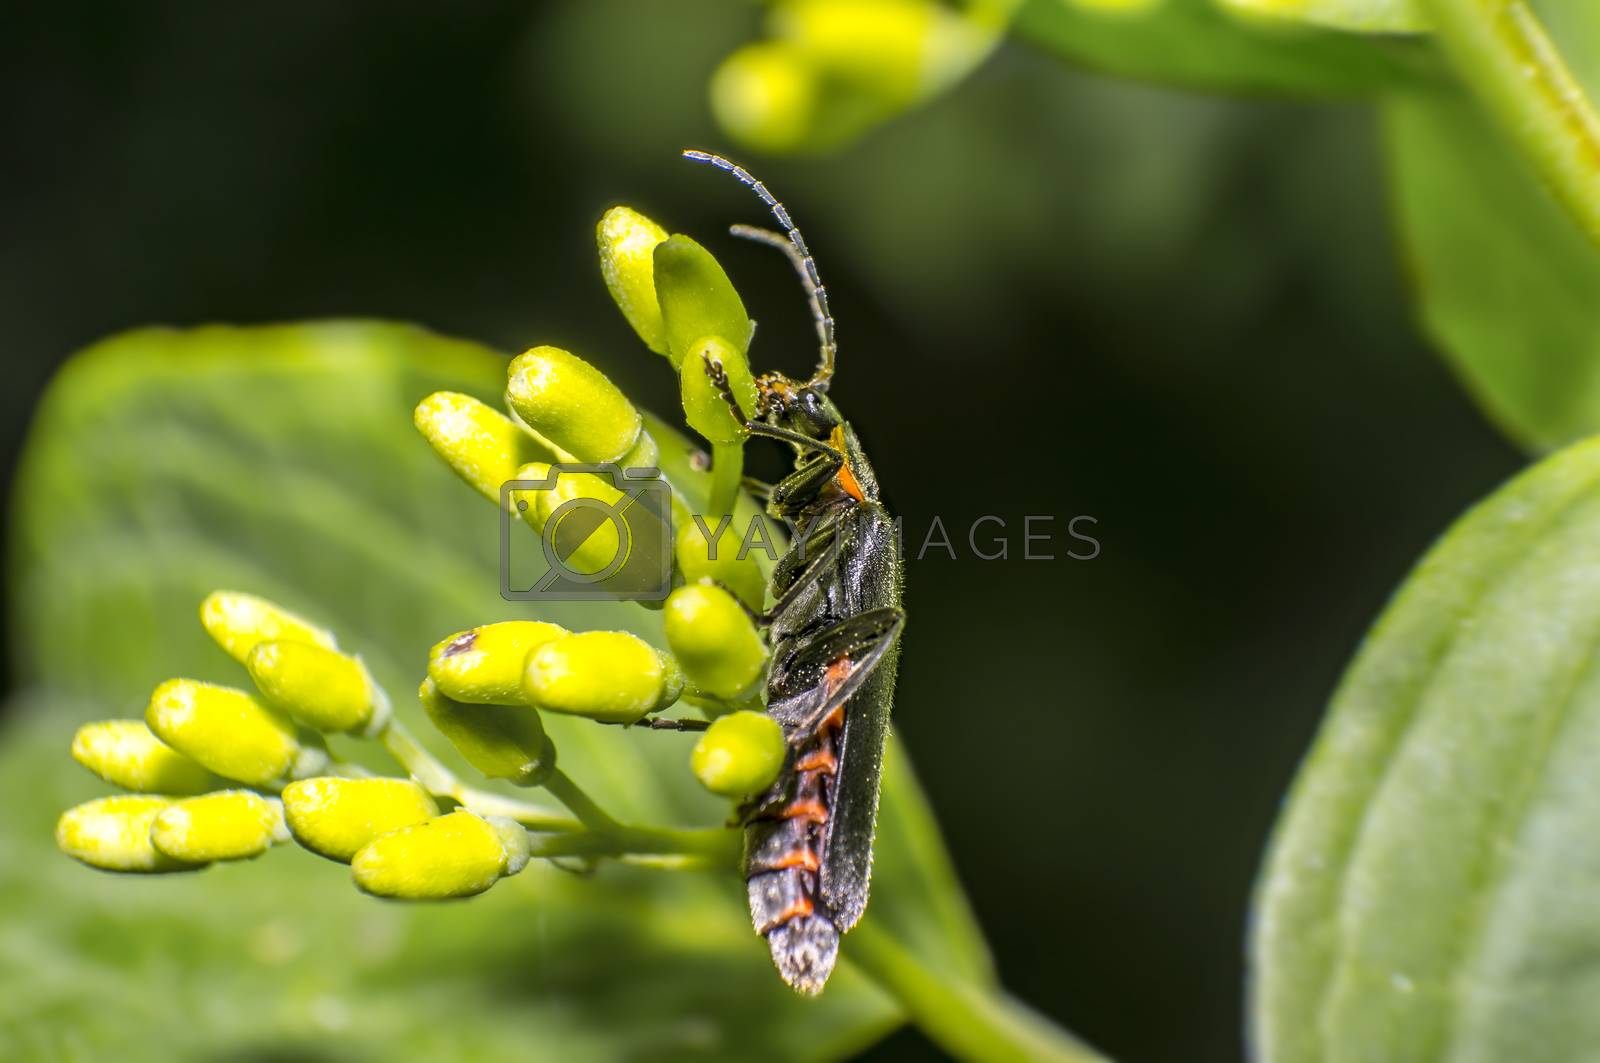 Royalty free image of small soldier soft beetle on green blossom in fresh season natur by mario_plechaty_photography